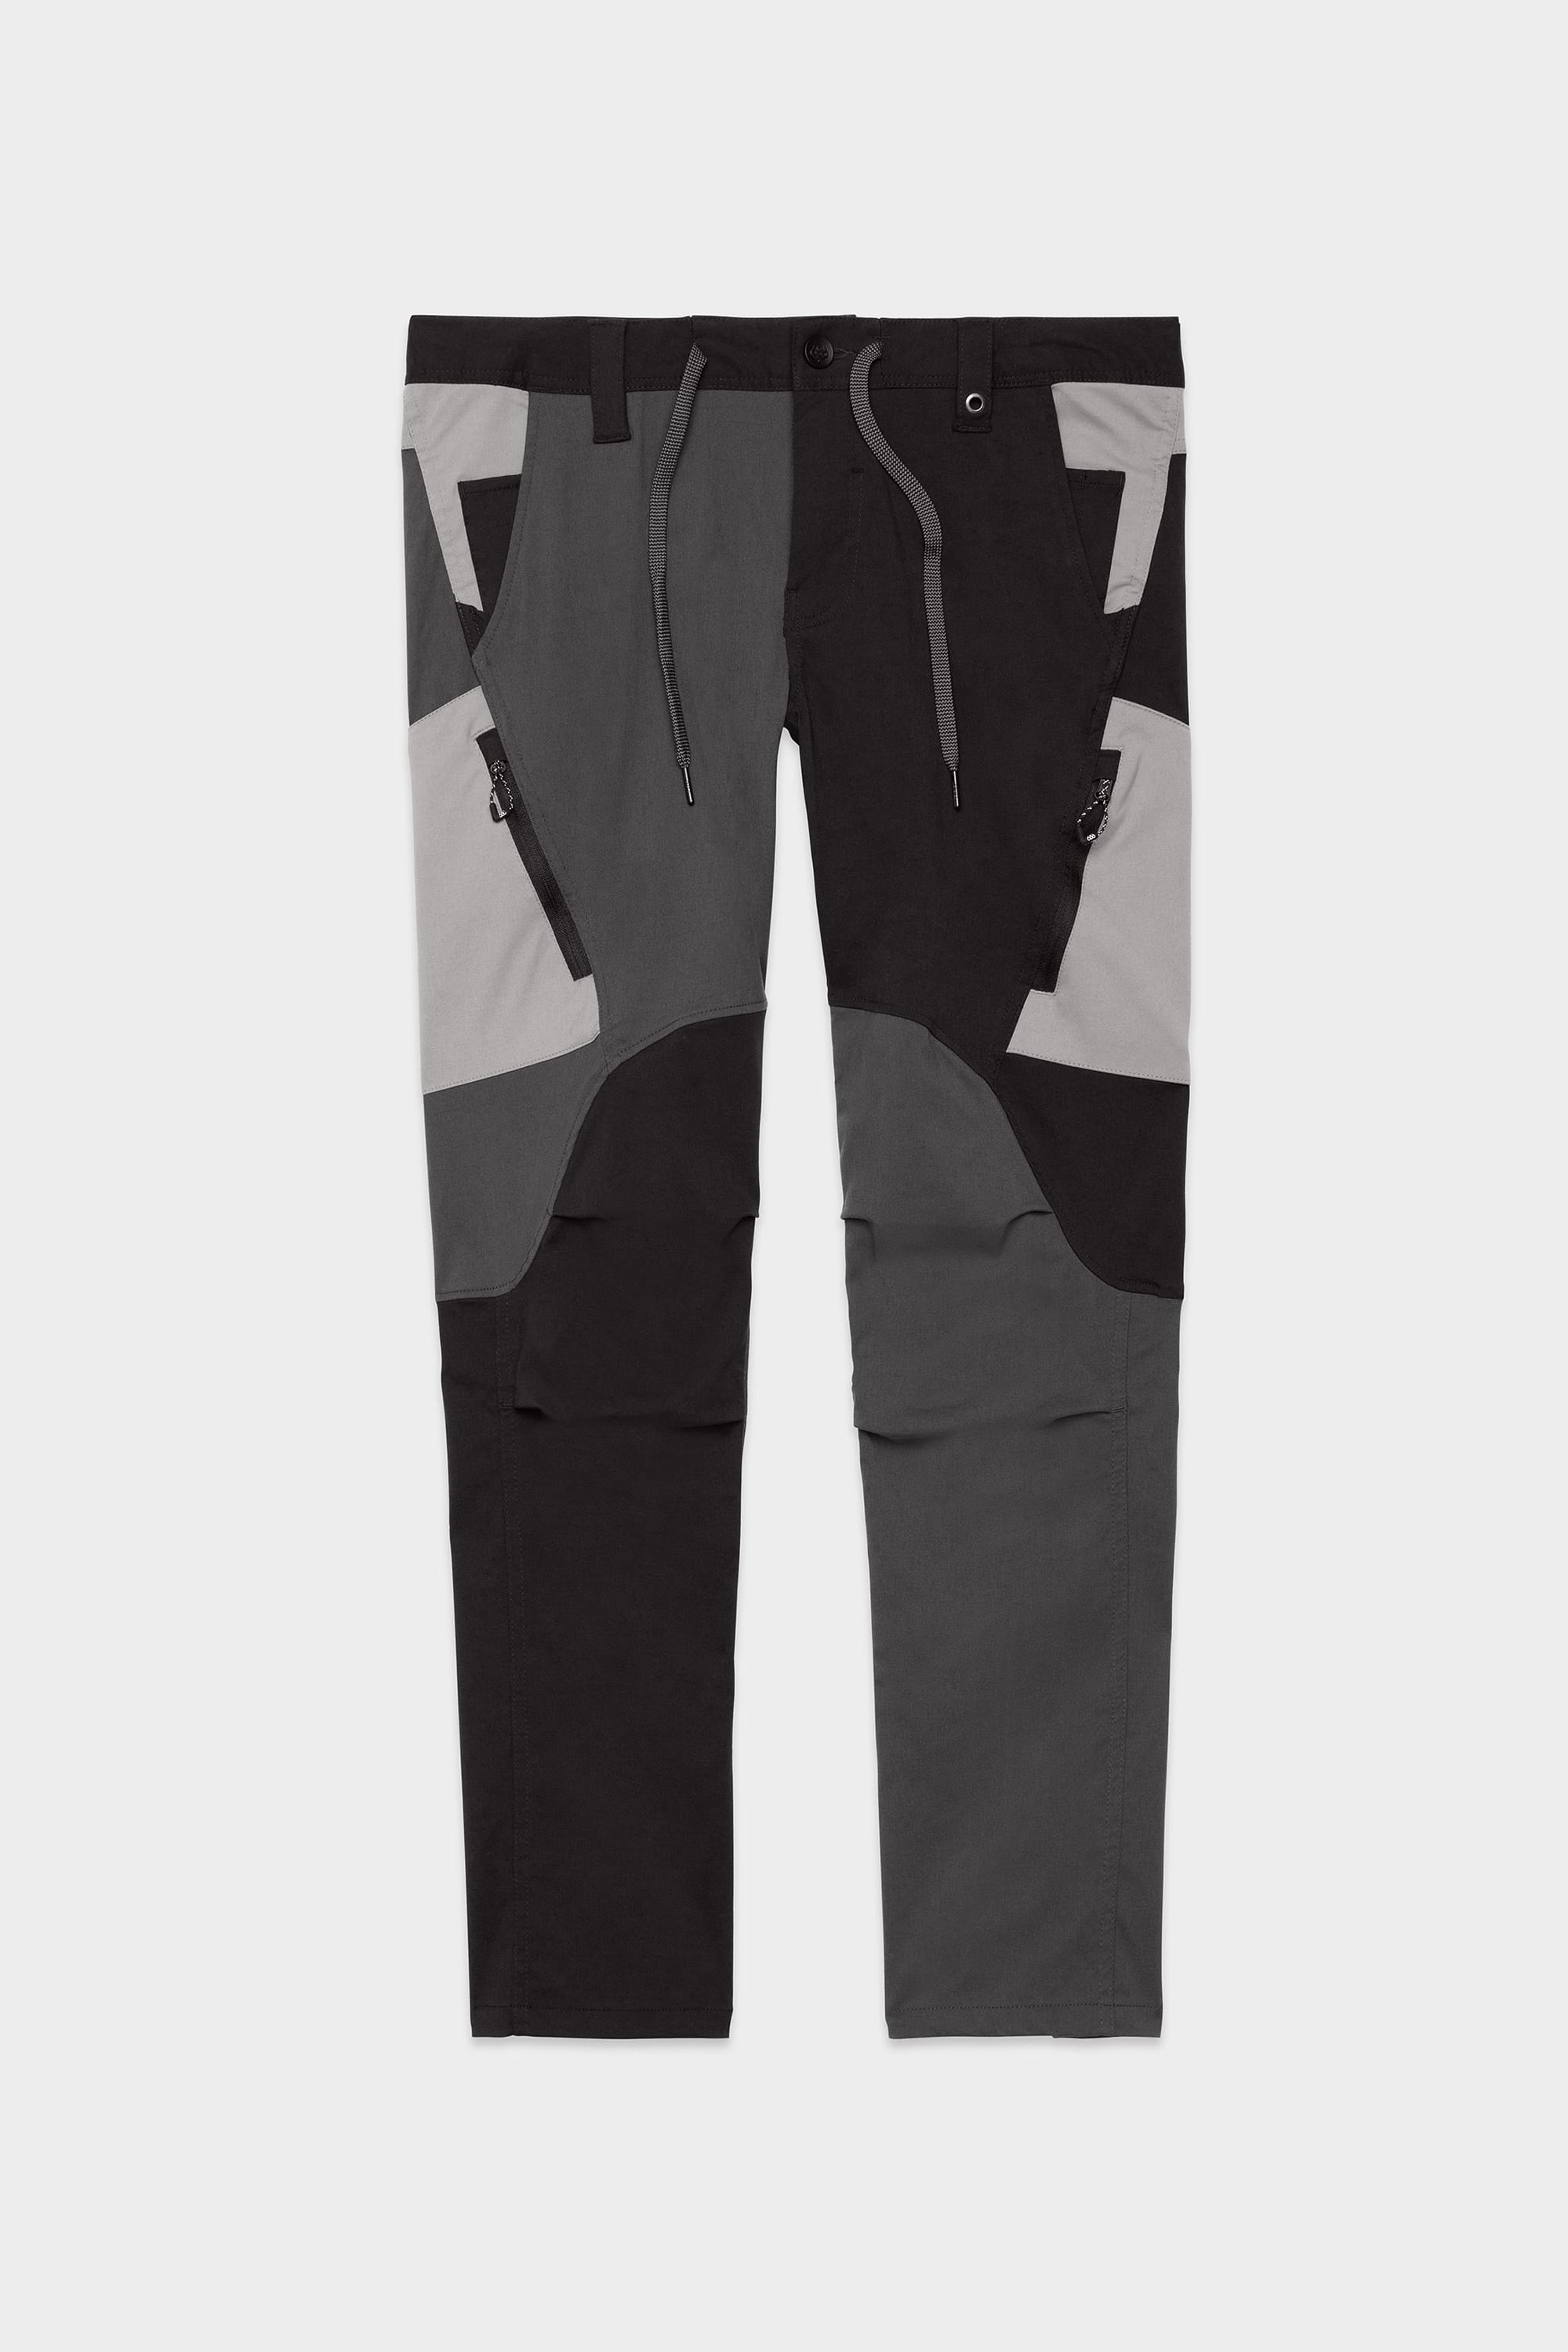 Alternate View 36 of 686 Men's Anything Cargo Pant - Slim Fit